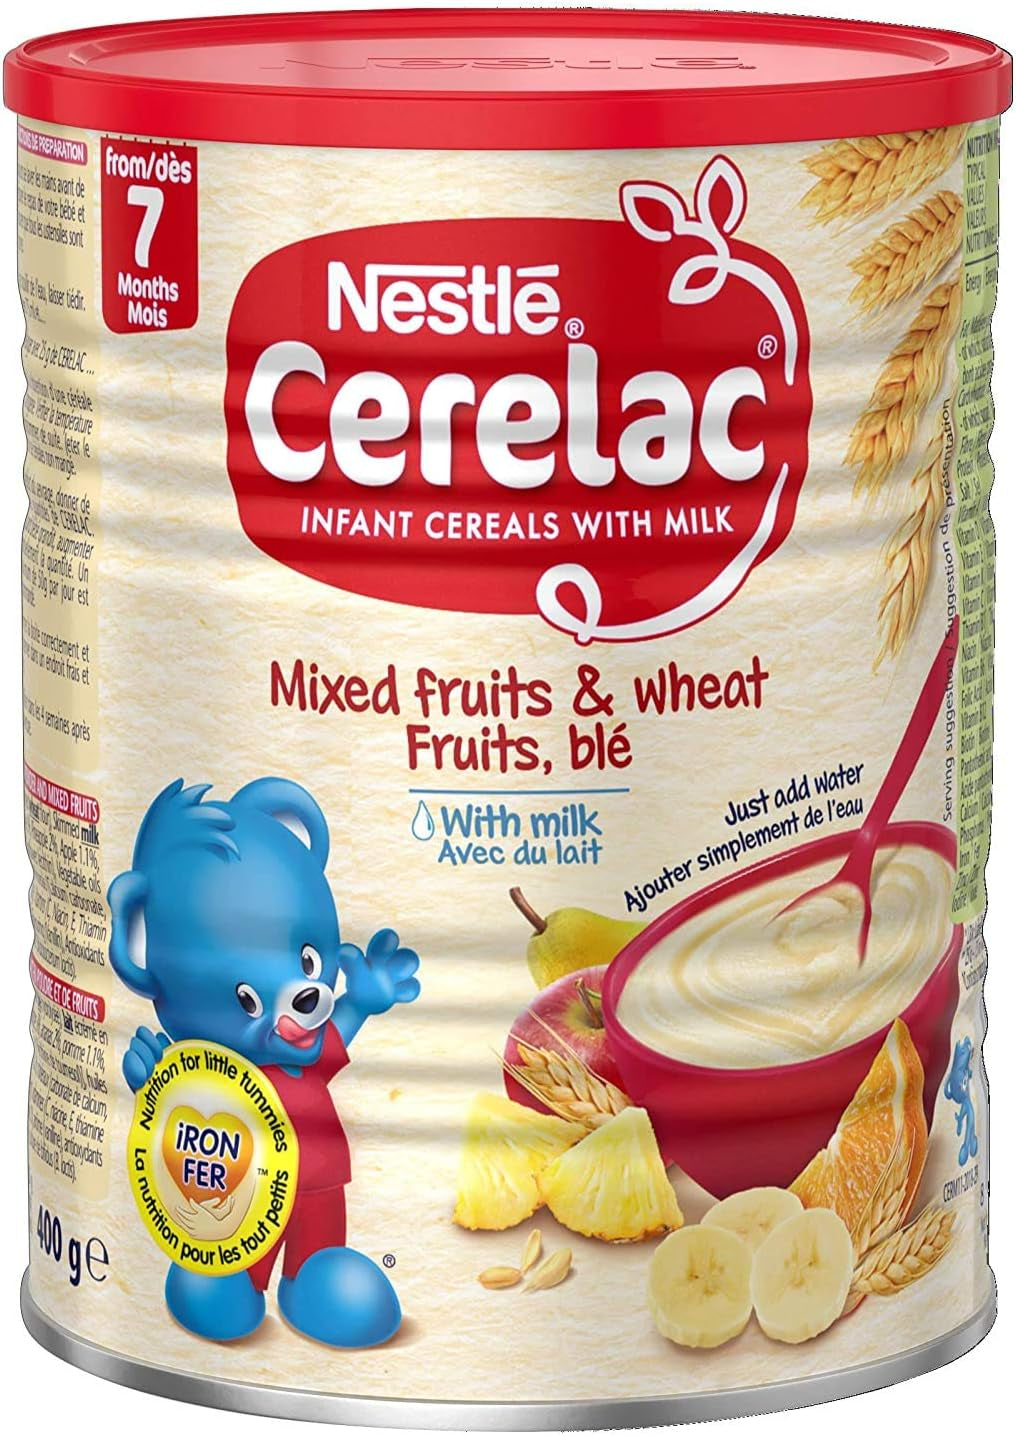 Cerelac Infant Cereal with Milk from 8 Months Mixed Fruits & Wheat - 14 Oz